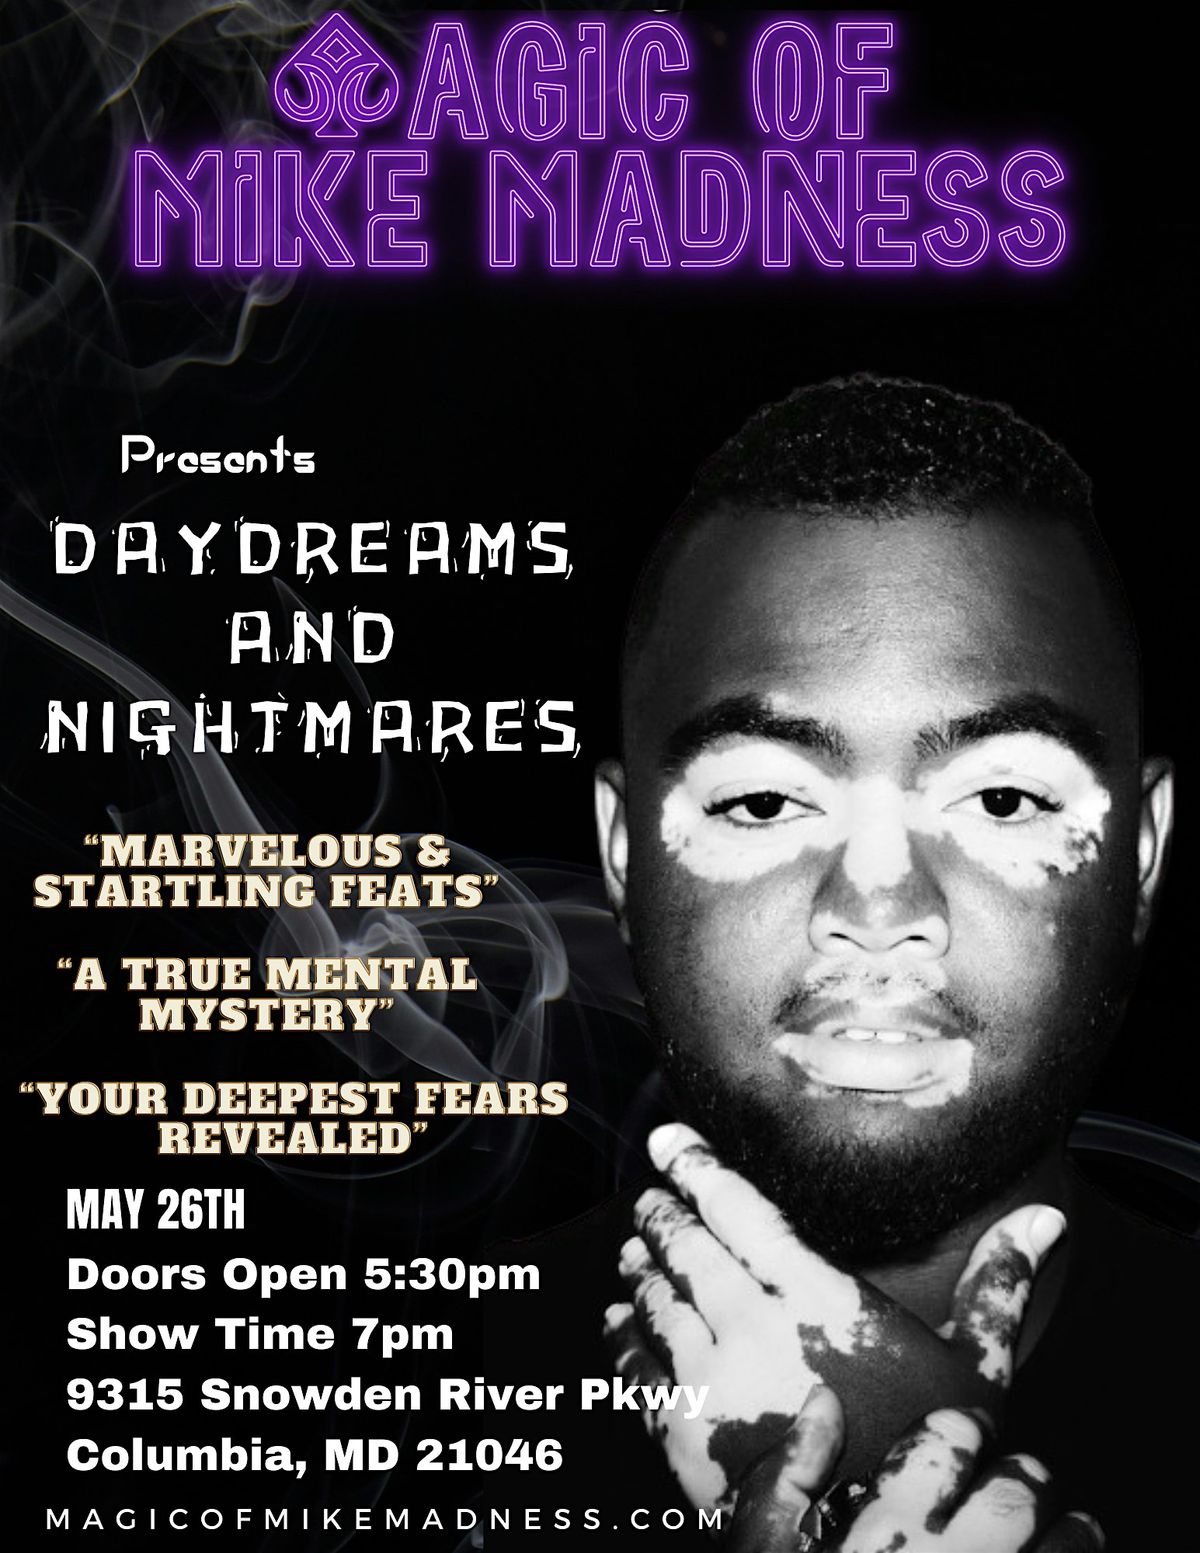 Magic of Mike Madness presents   Daydreams and Nightmares